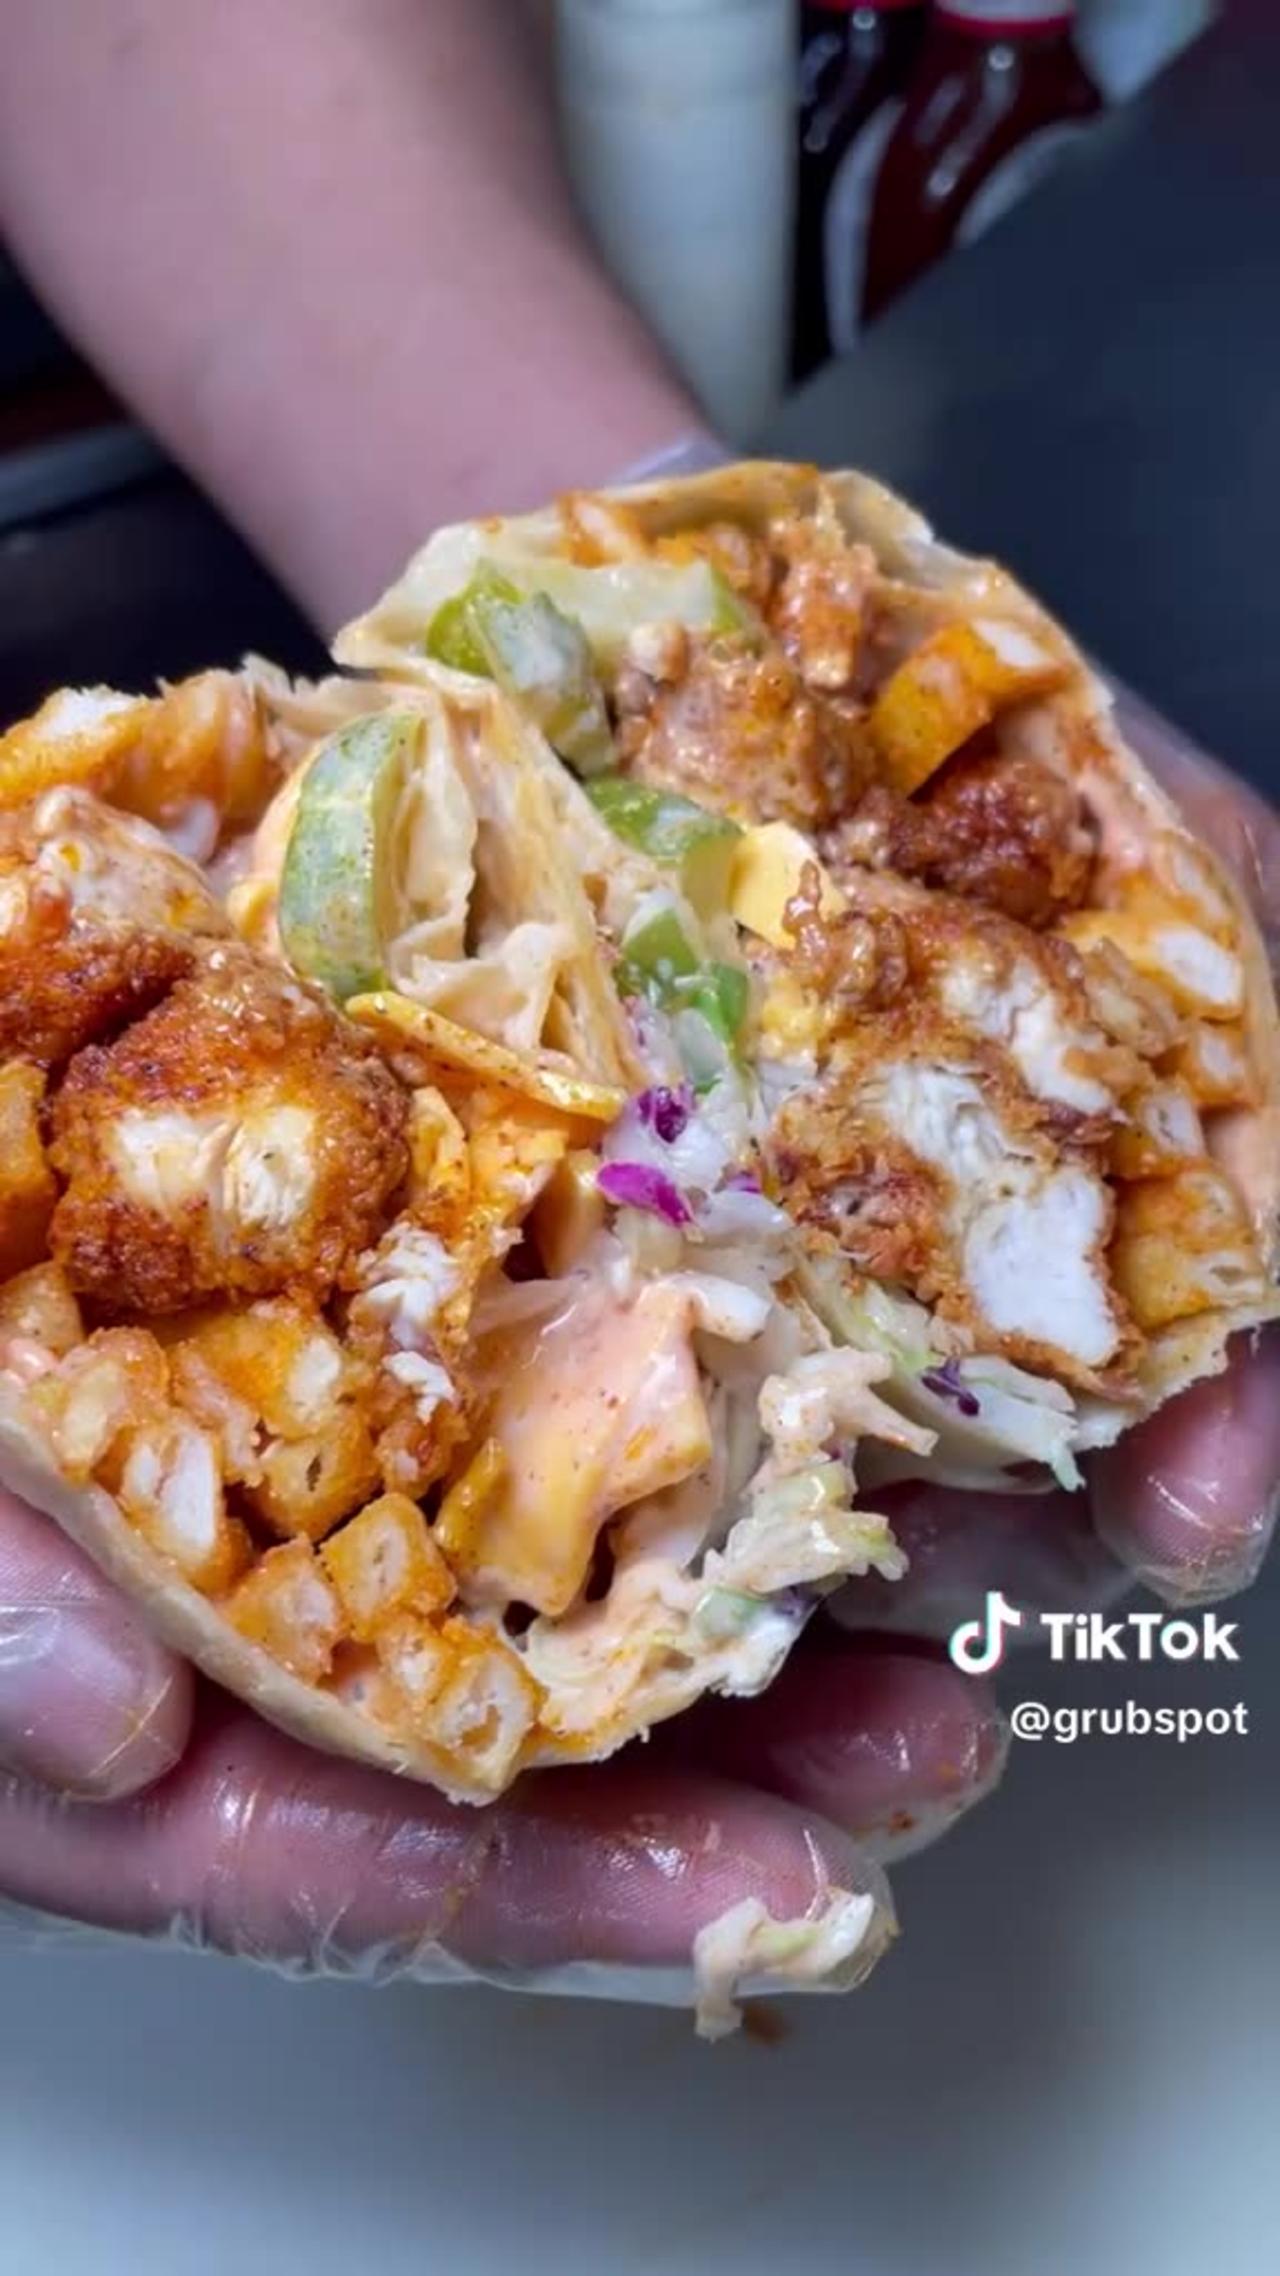 how-to-make-a-chicken-wrap-newsr-video